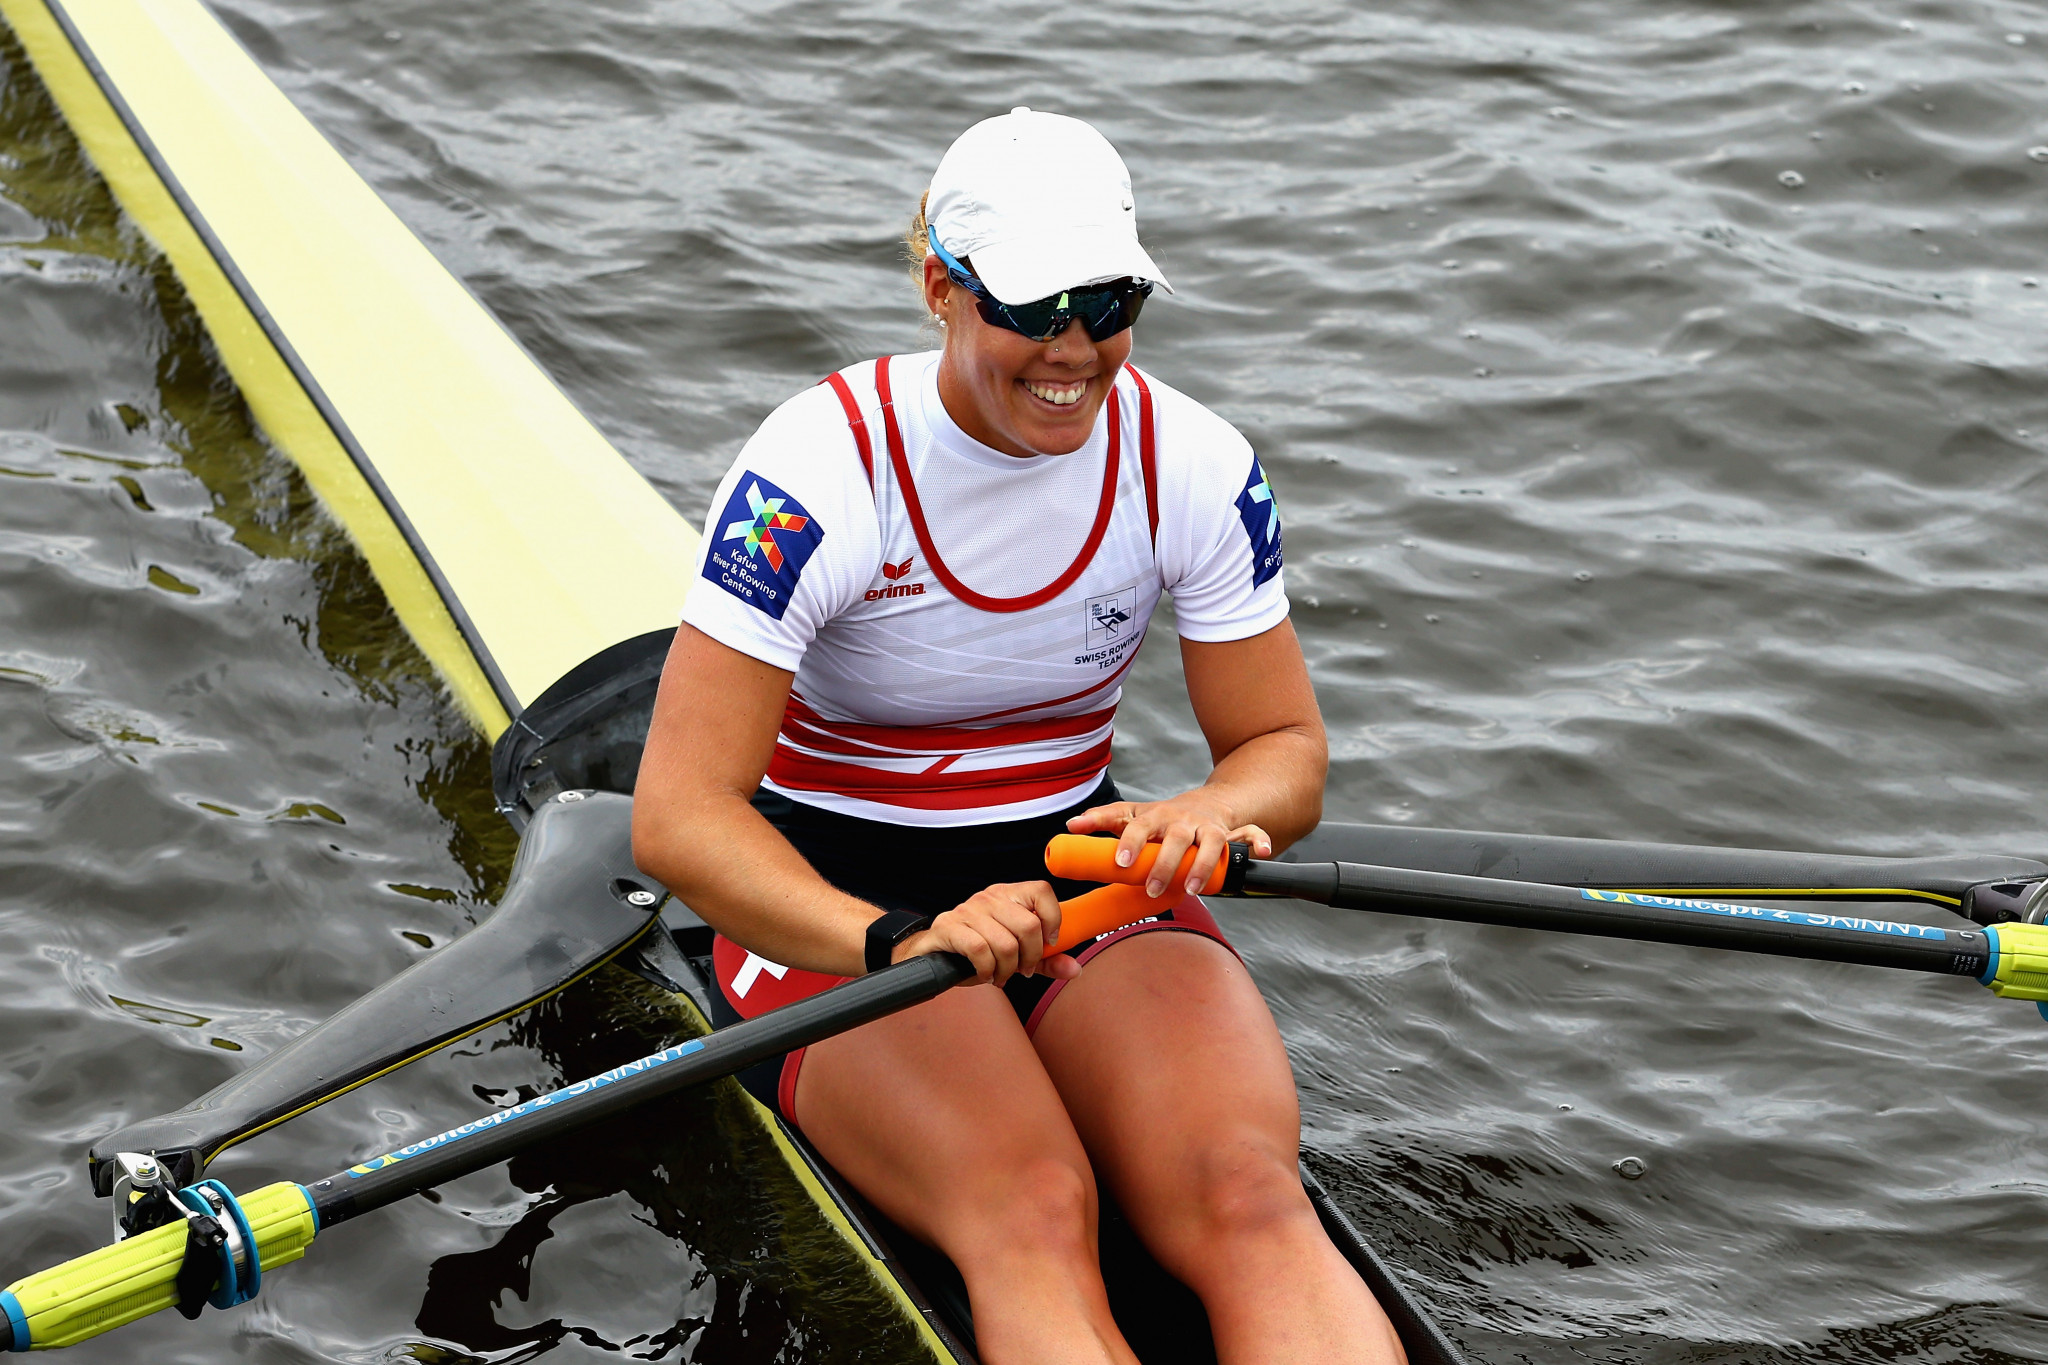 European champion Jeannine Gmelin of Switzerland will attempt to retain her women's single sculls title in front of a home crowd at the European Rowing Championships ©Getty Images